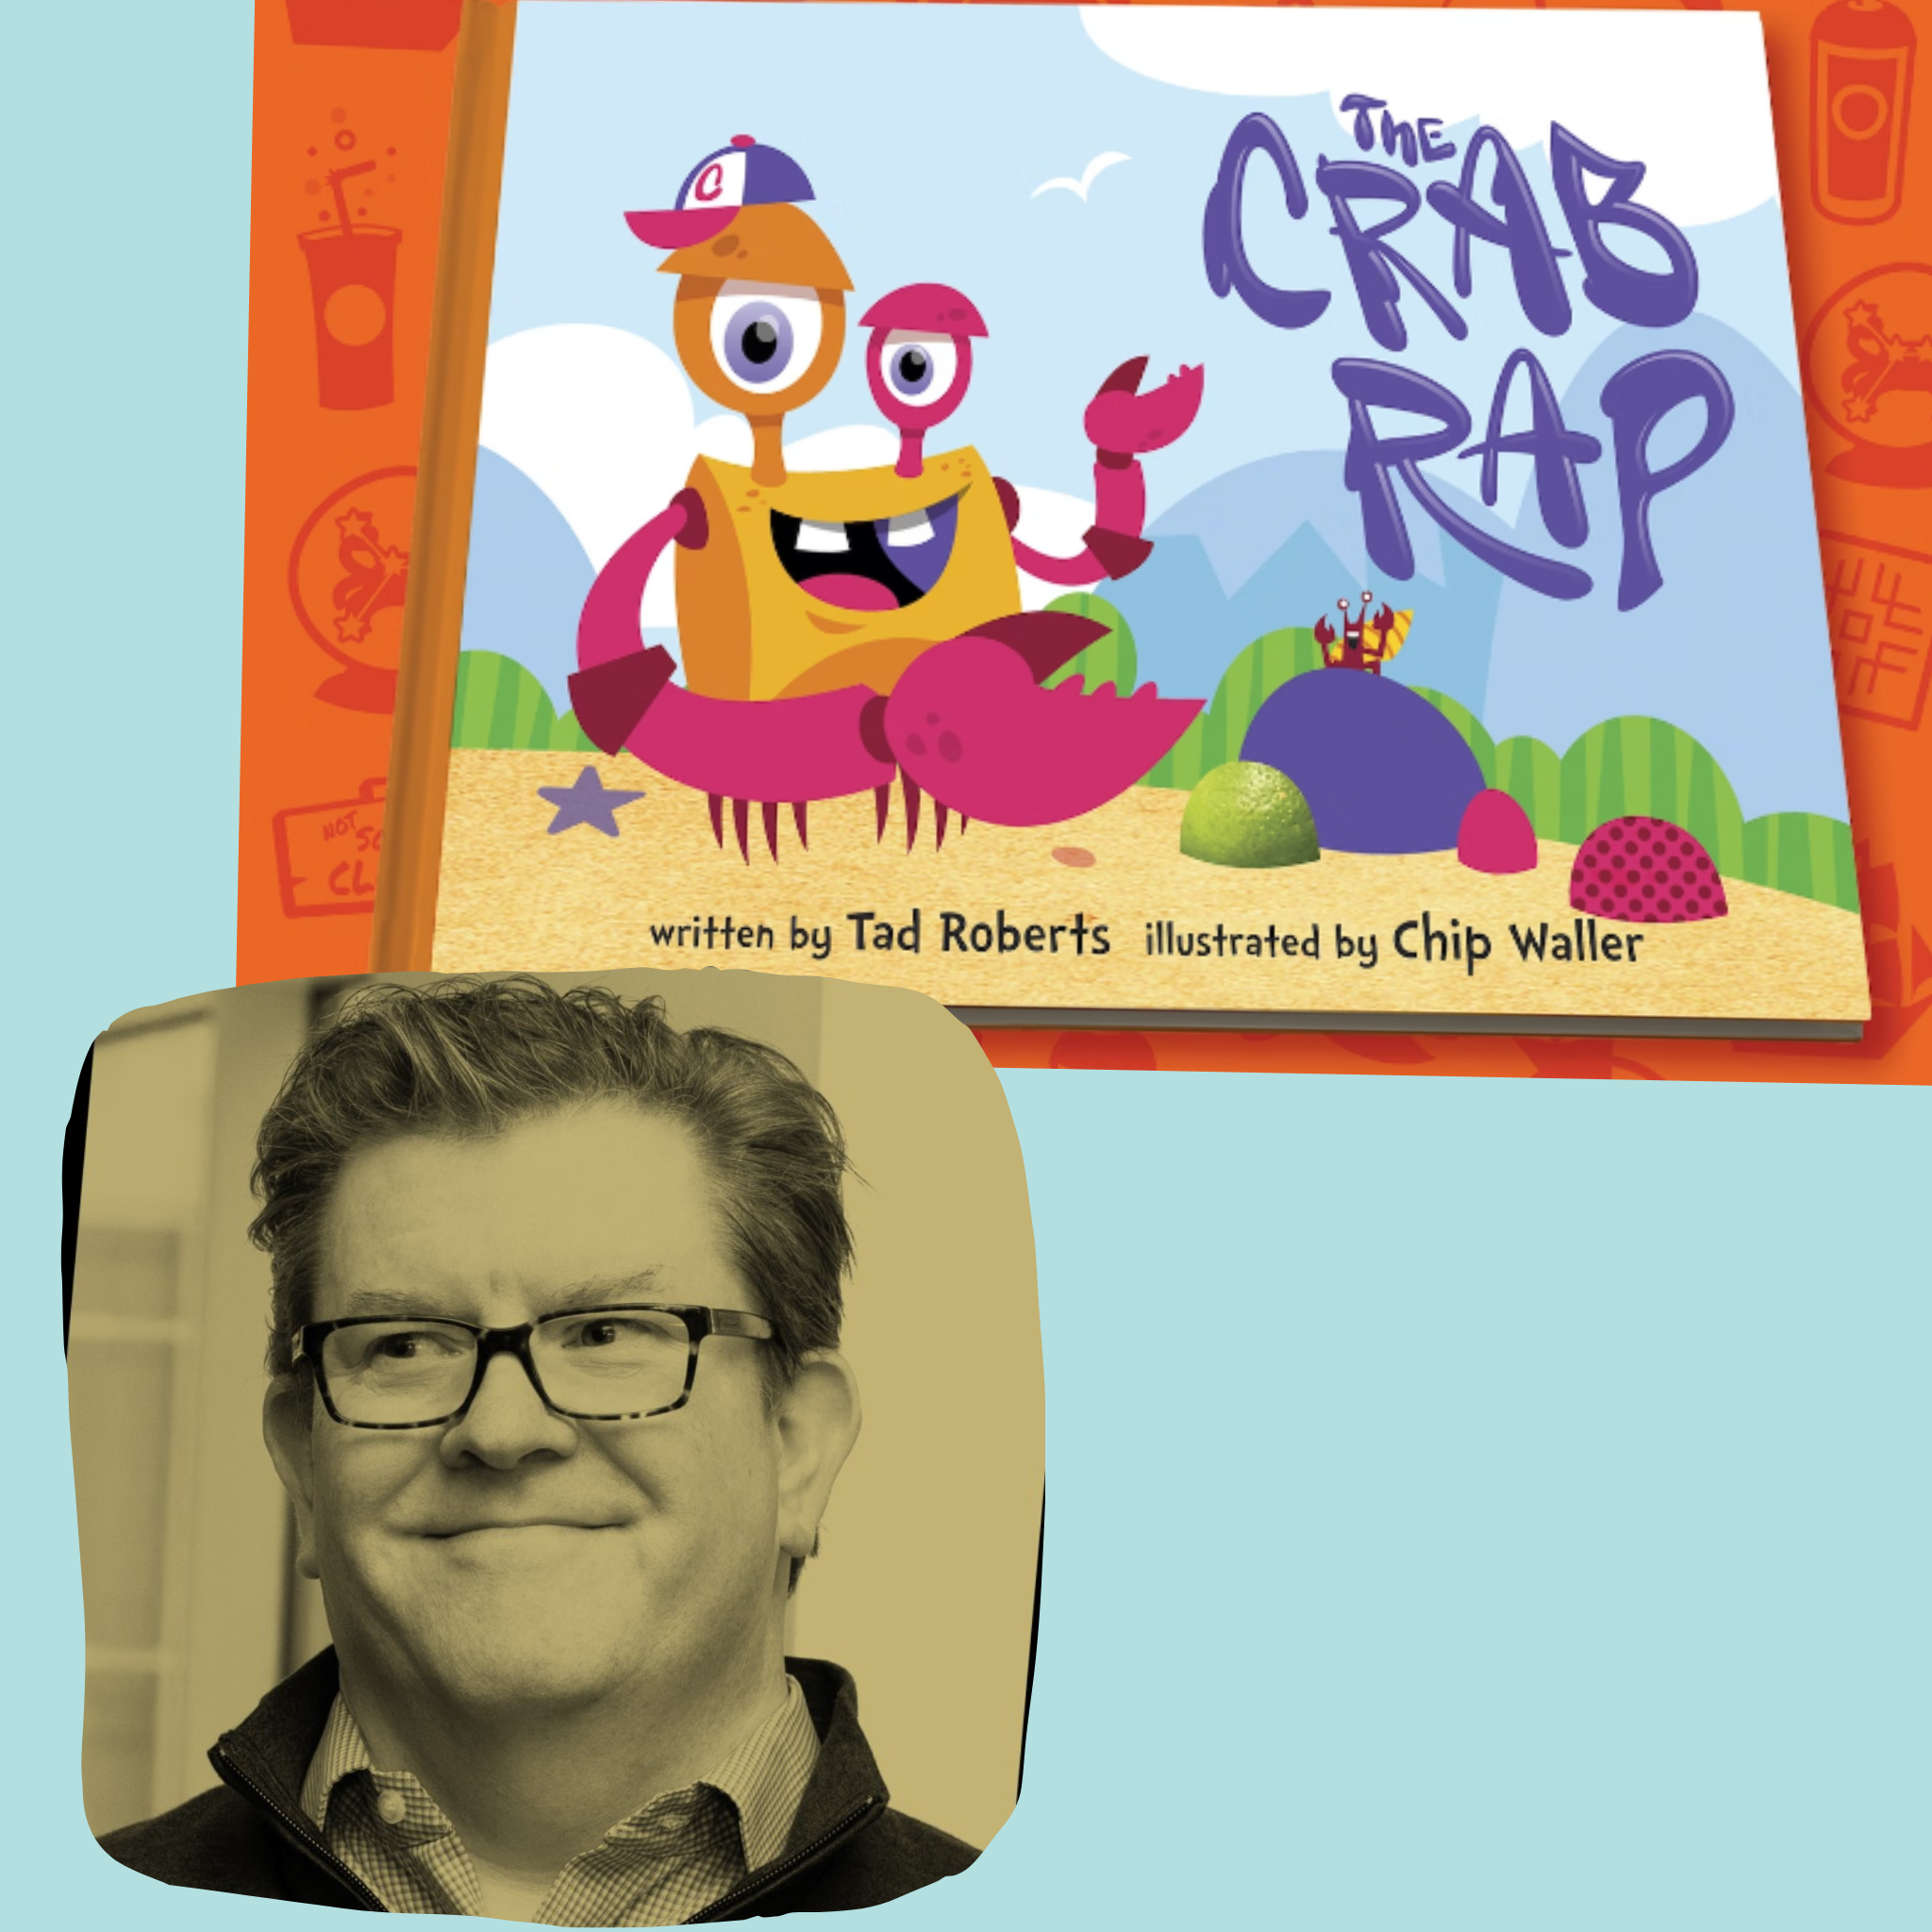 "The Crab Rap" a self published children's picture book about a silly crab and a song.